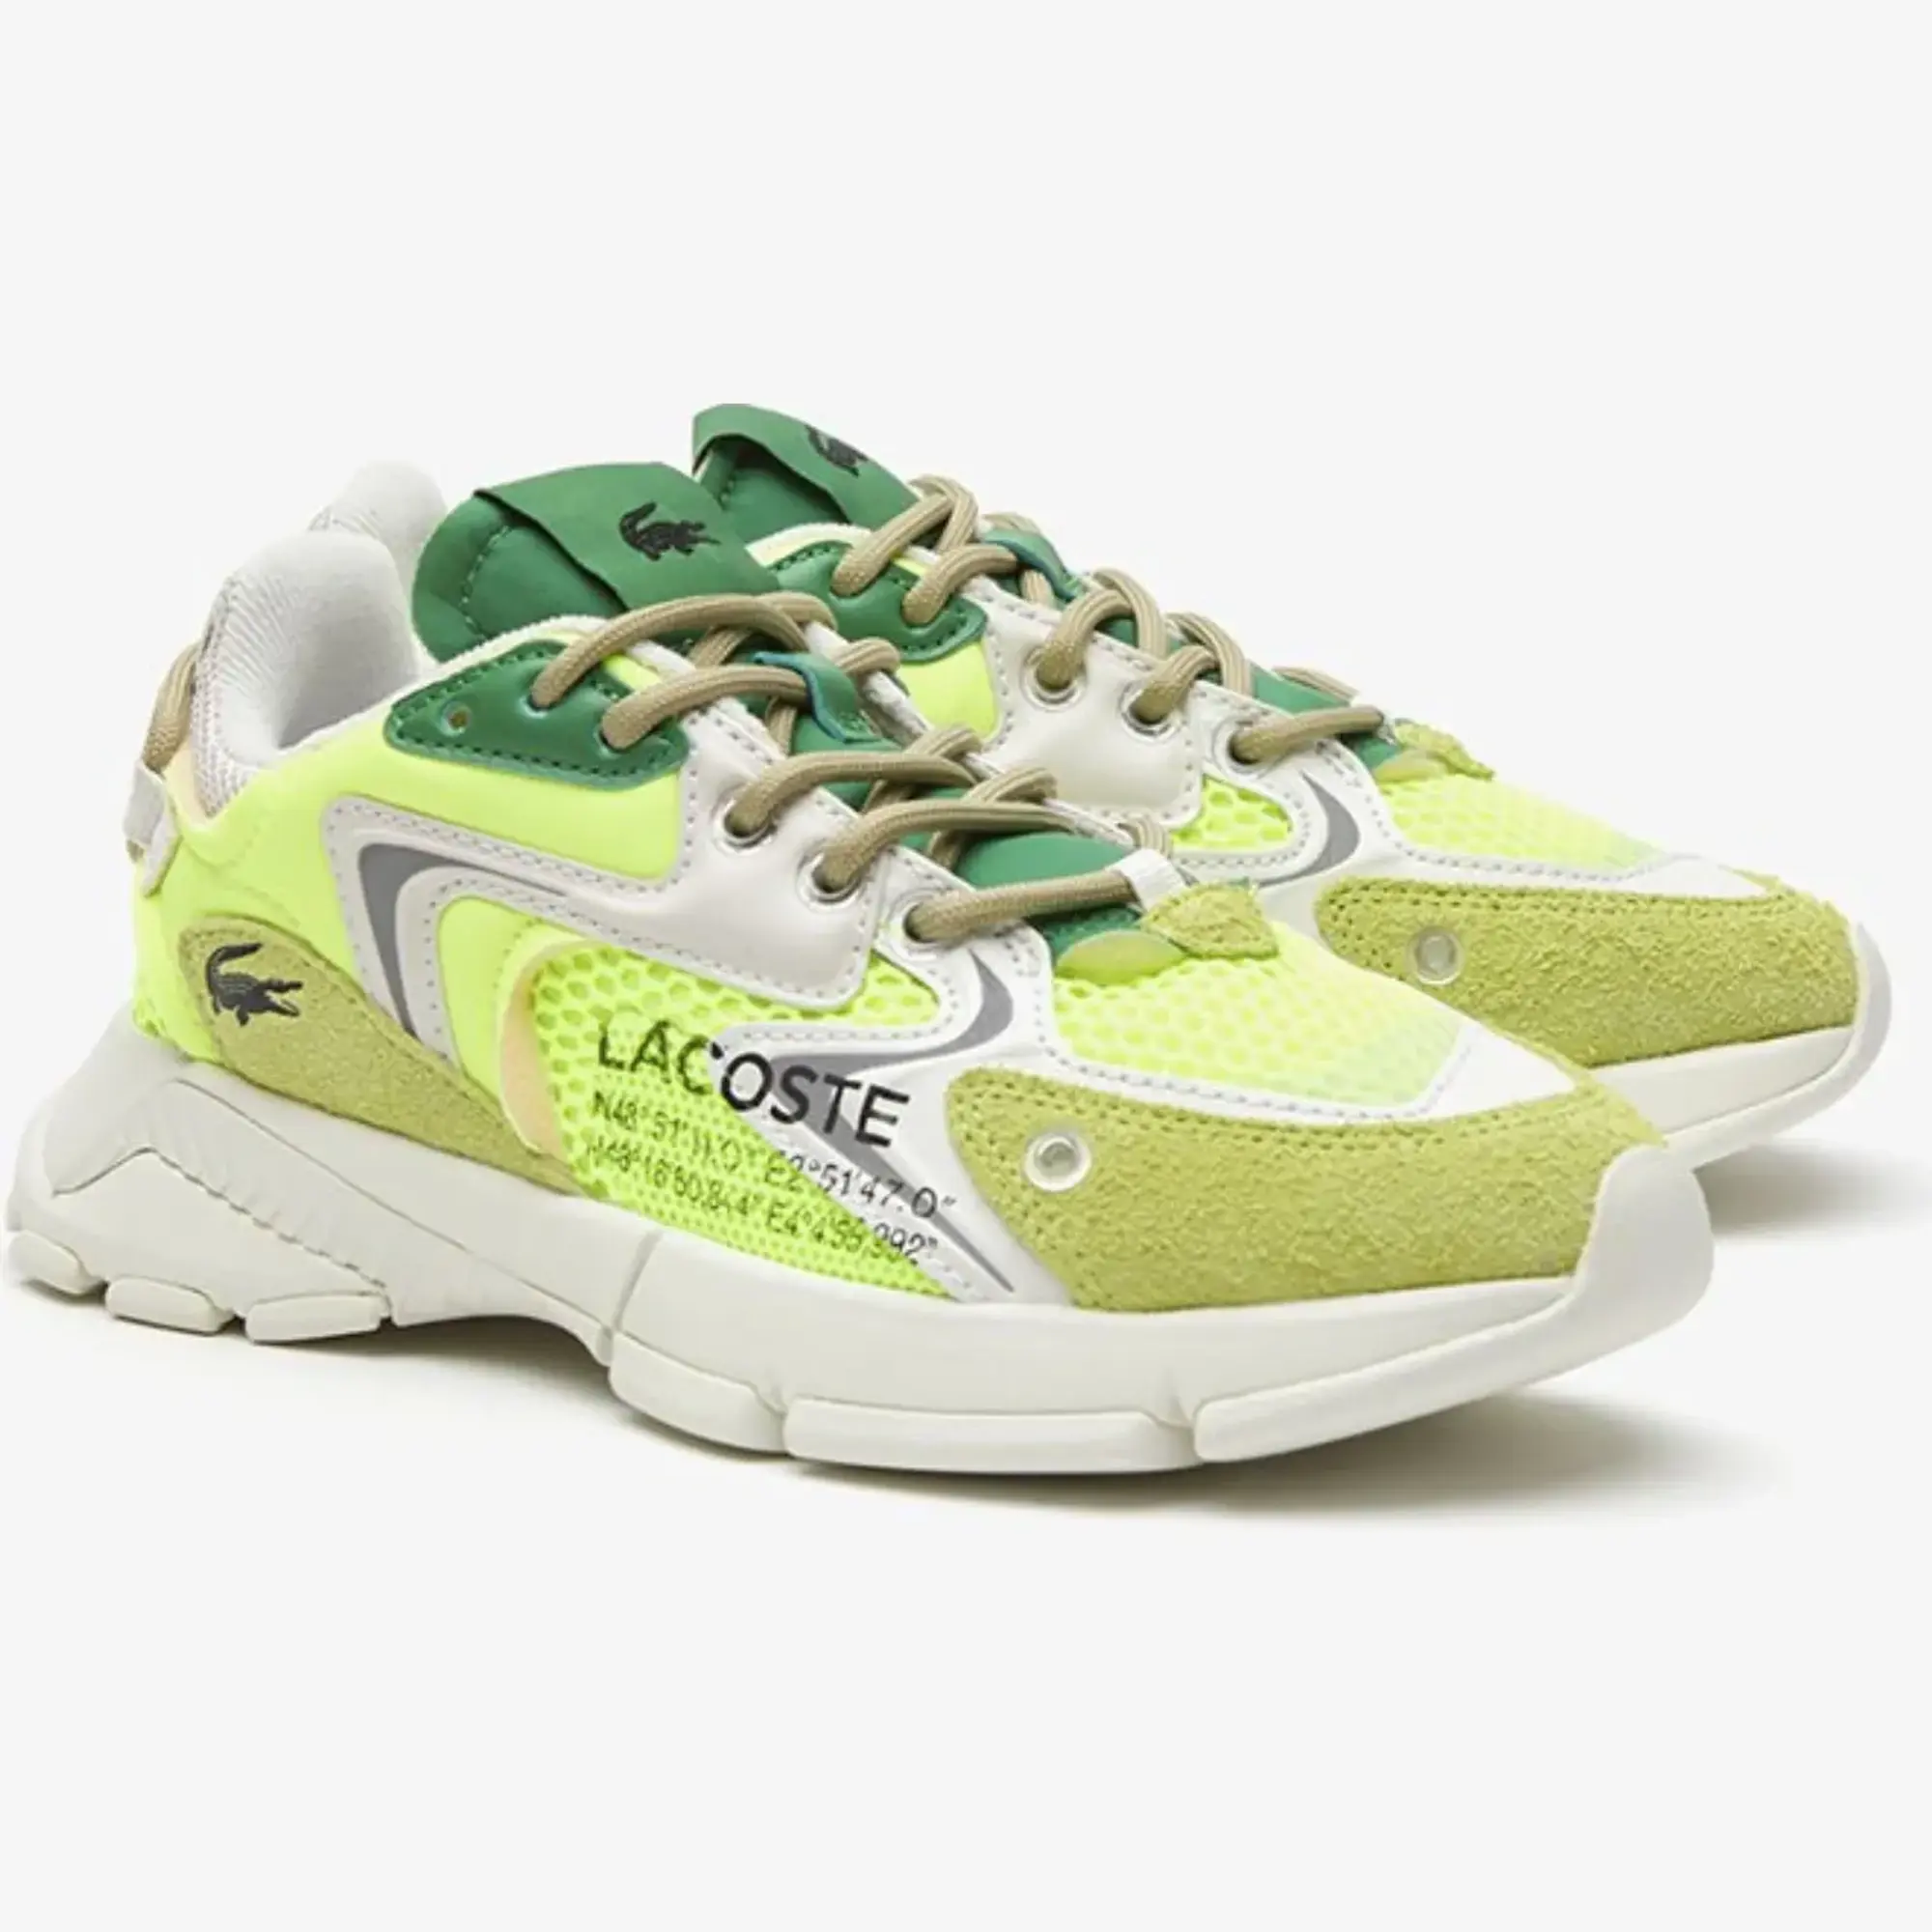 Lacoste L003 Neo Trainers - Yellow